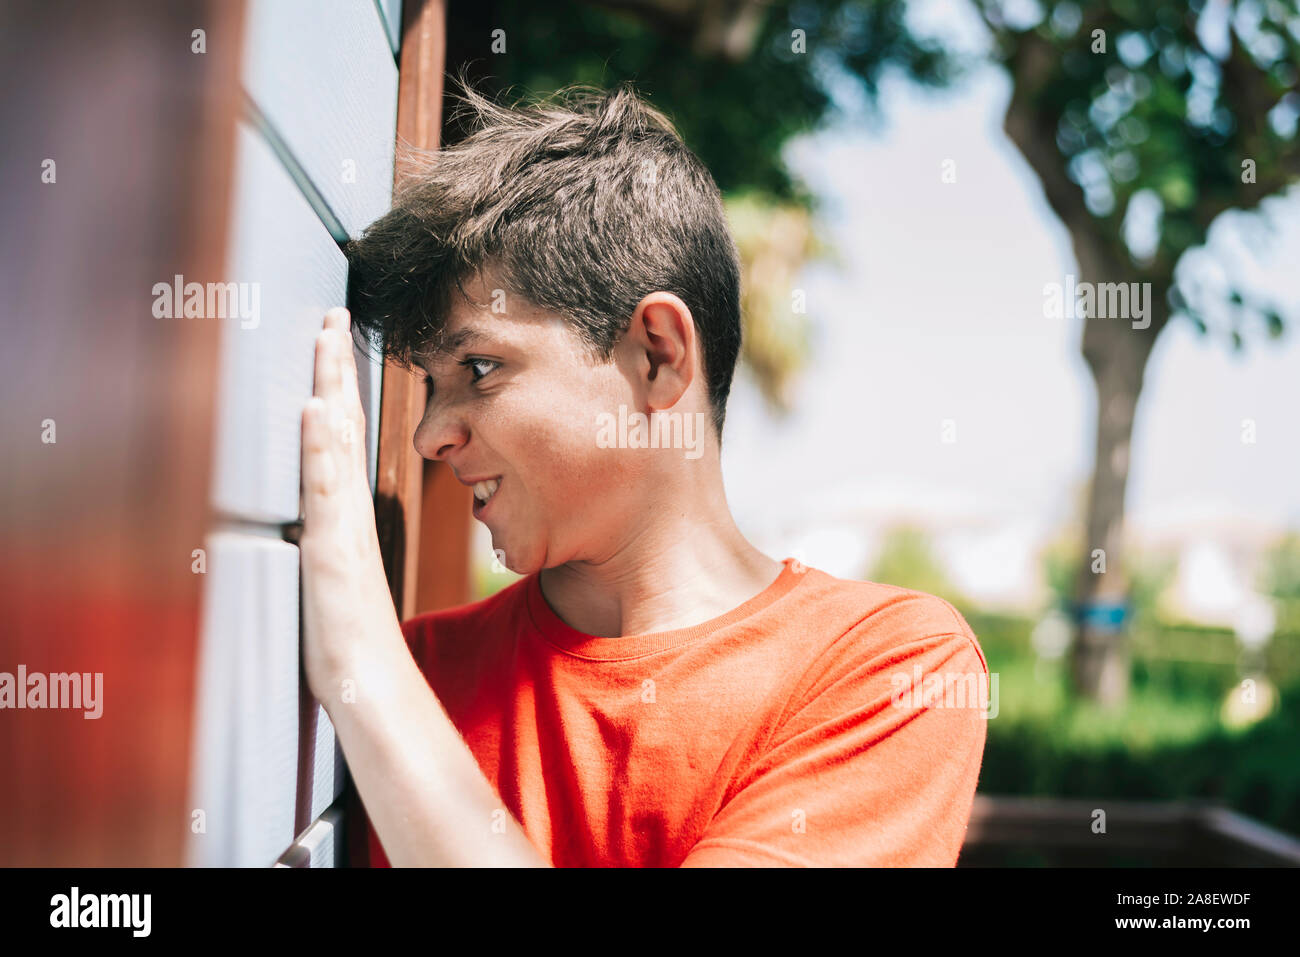 Side view of teenage male grimacing against a outdoors wall Stock Photo